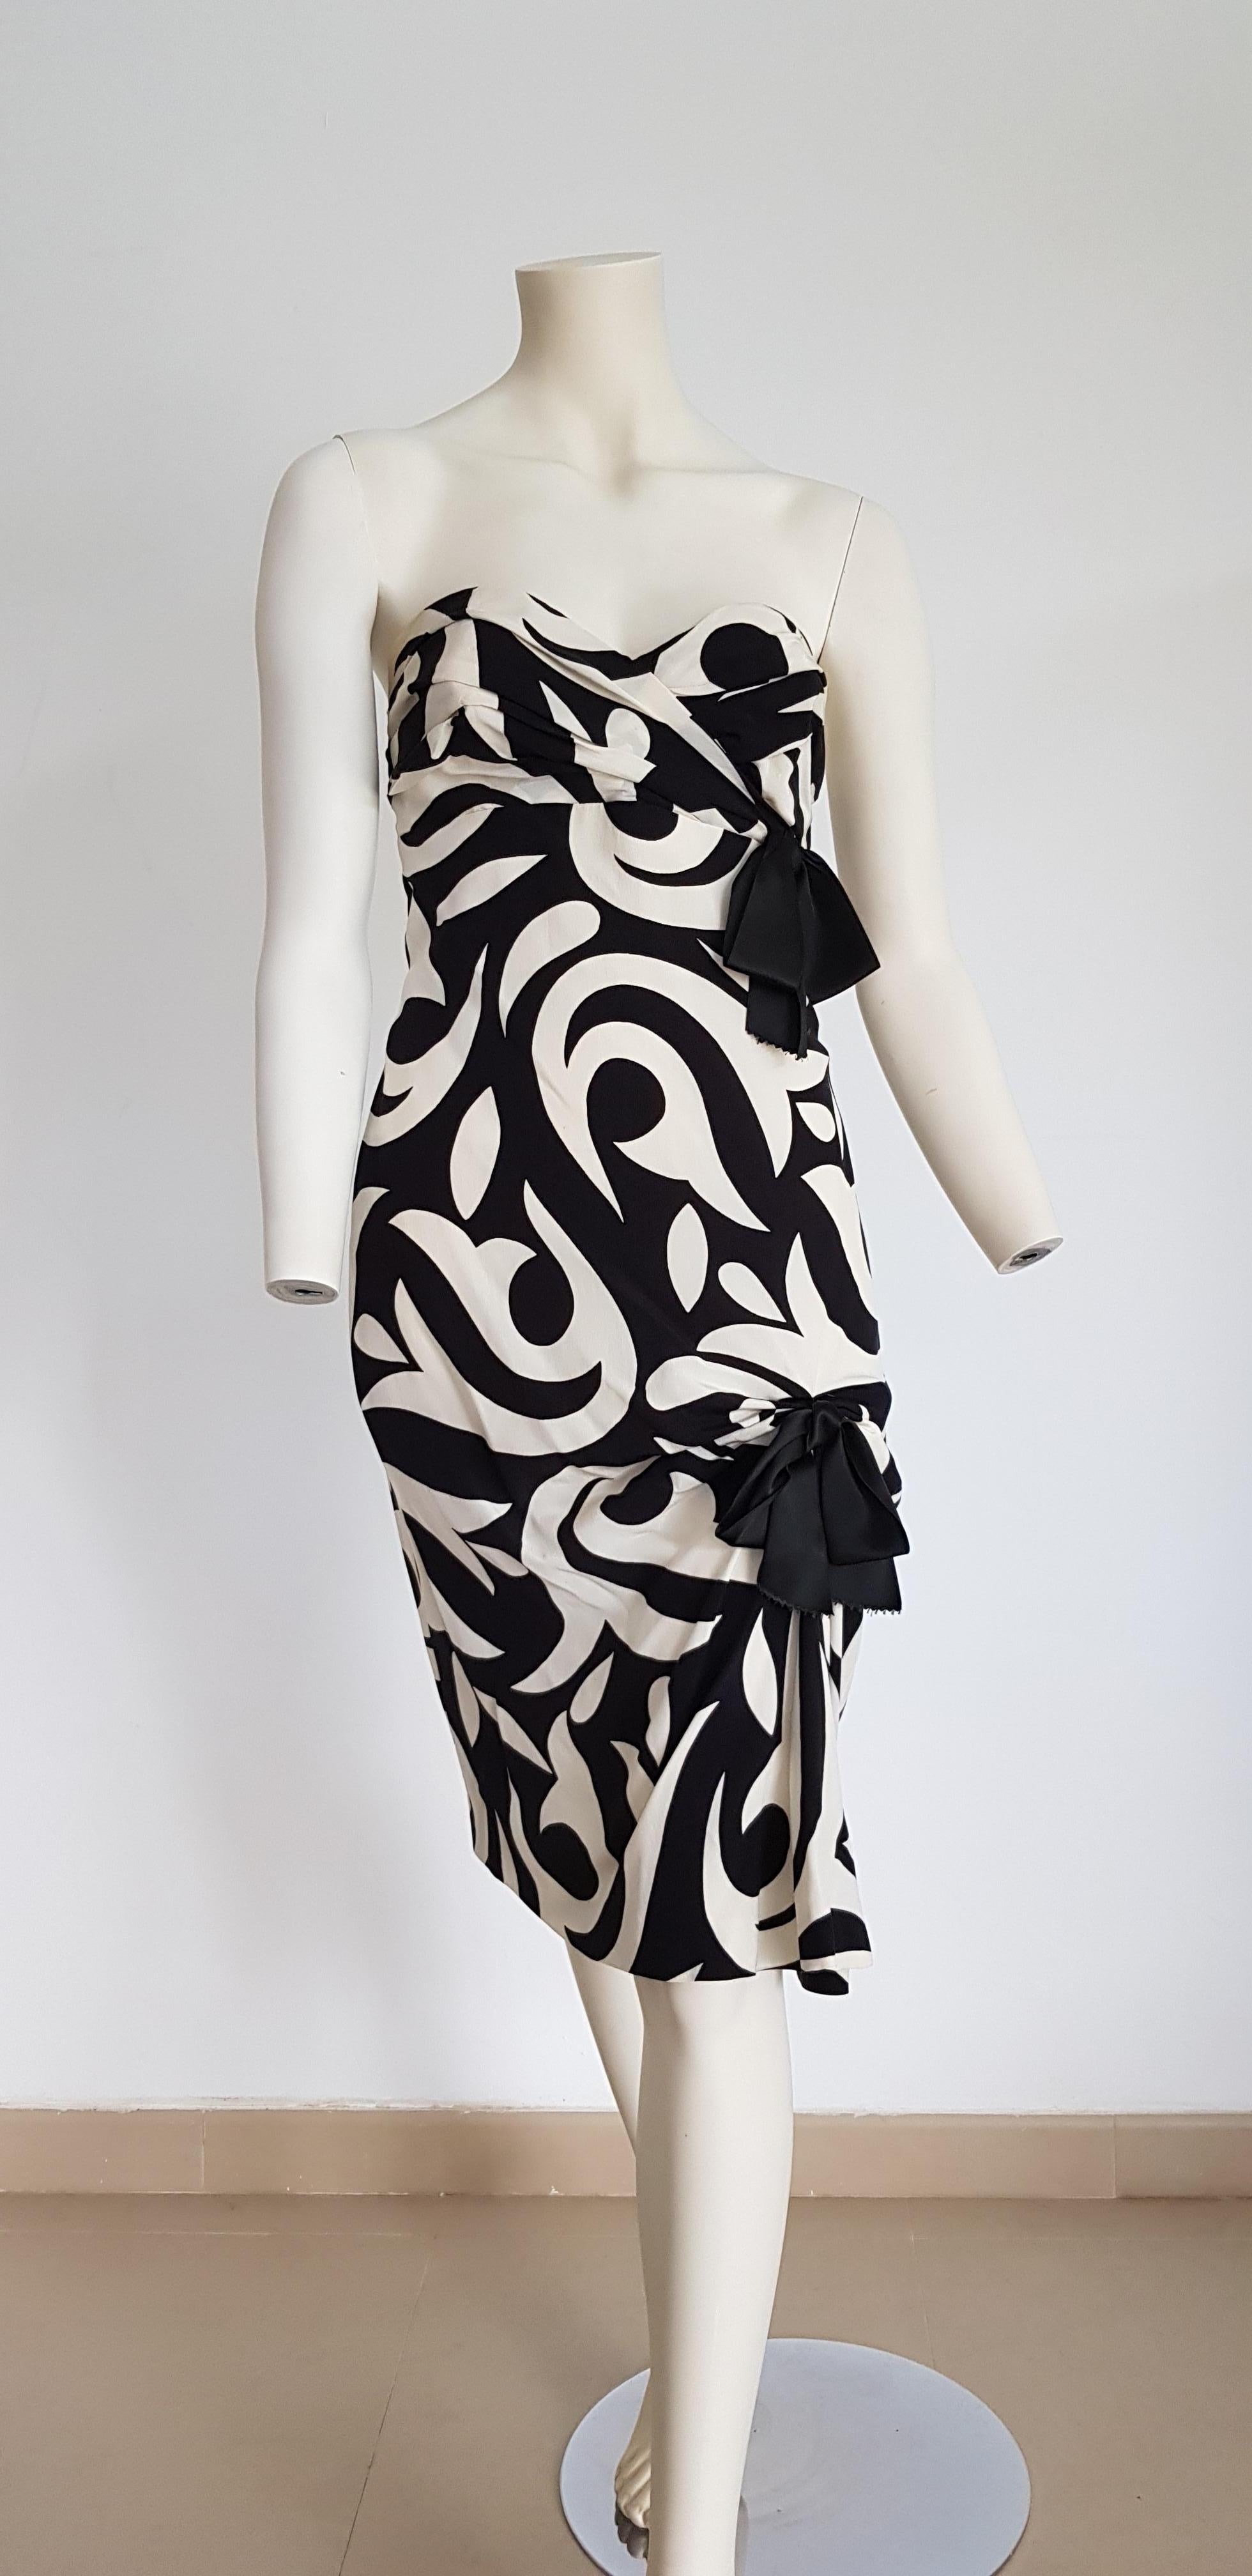 CHANEL Haute Couture, strapless, black with white lilies flowers design, two black bows on the front, silk, evening dress day dress - Unworn, New.

SIZE: equivalent to about Small / Medium, please review approx measurements as follows in cm: lenght